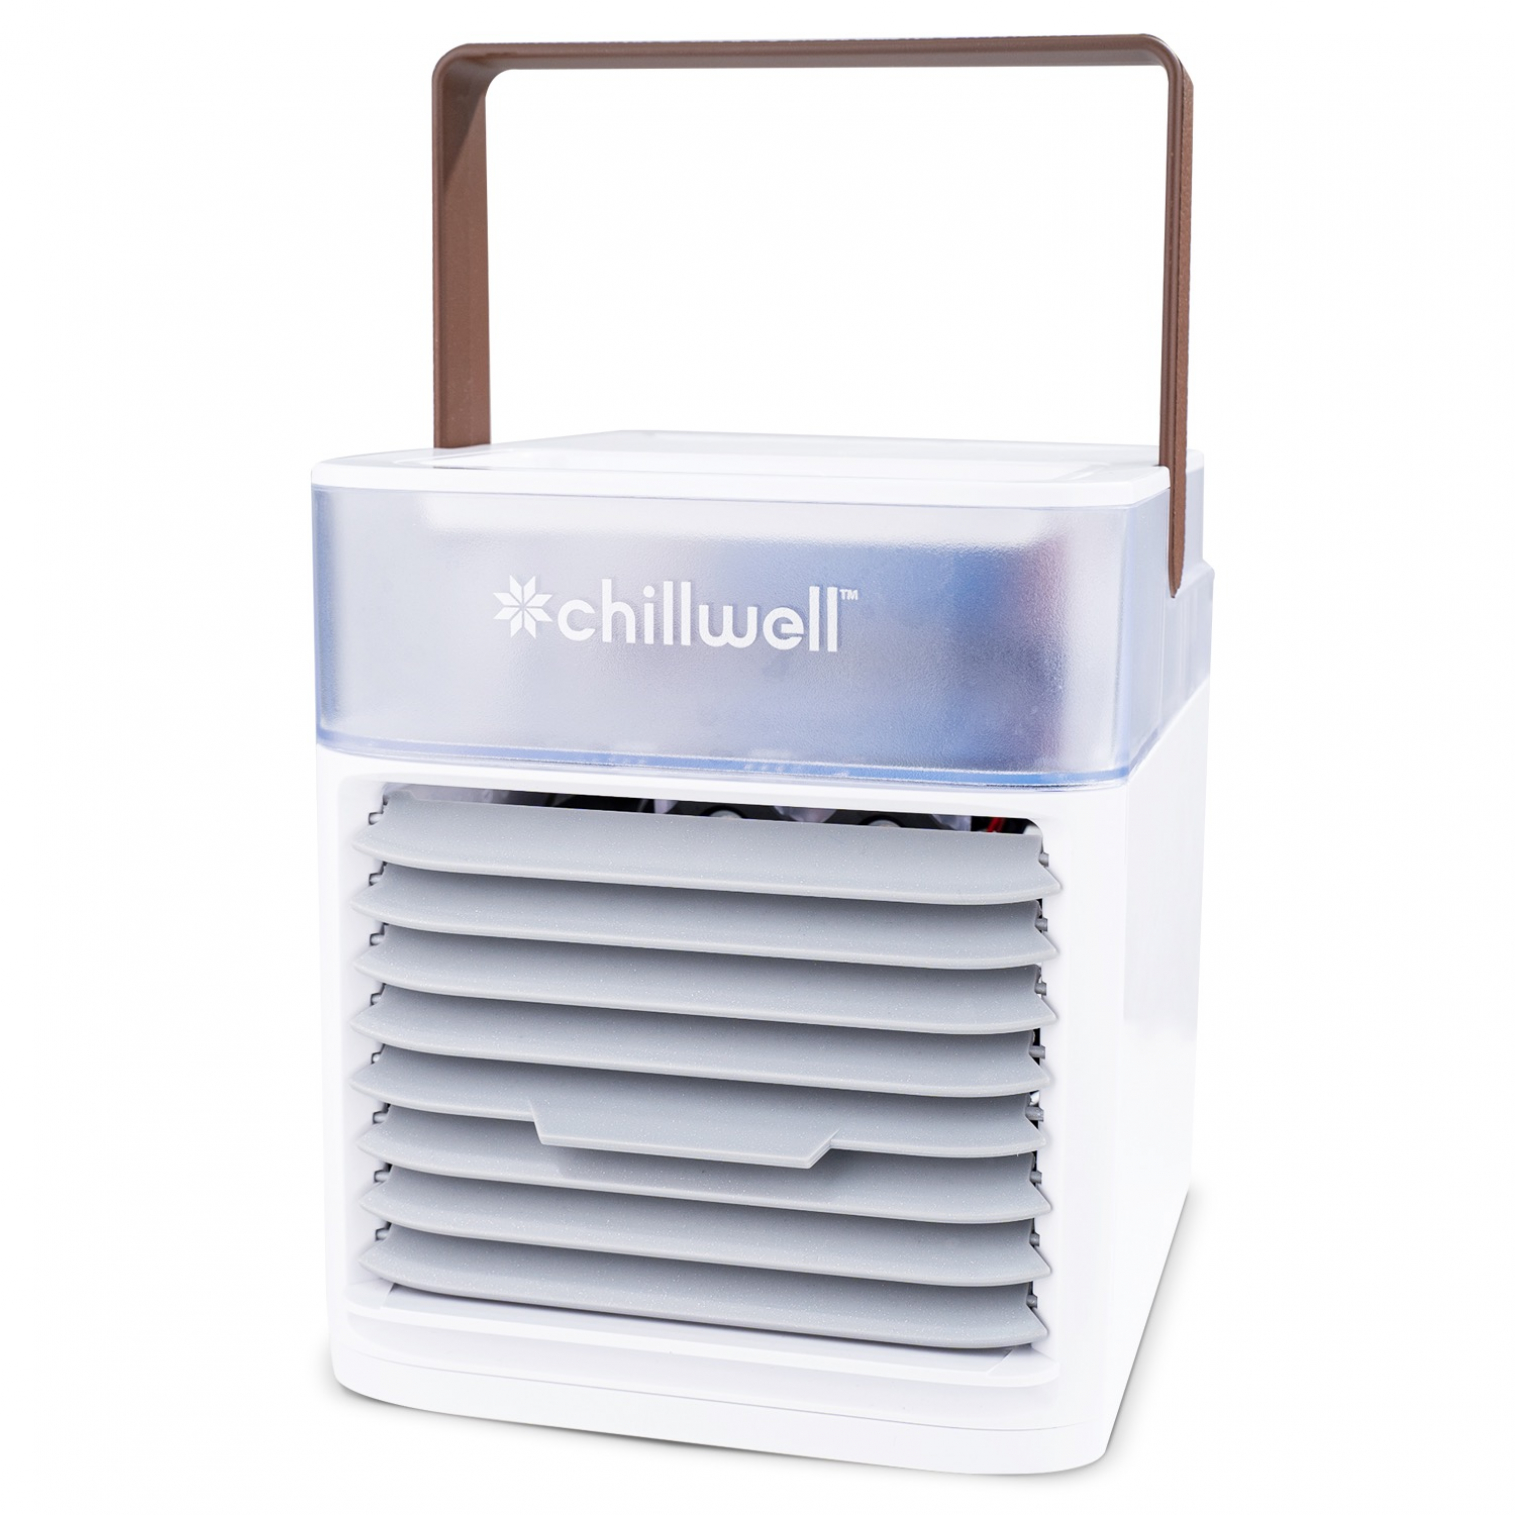 Chillwell Ac Cooler Pure Chill